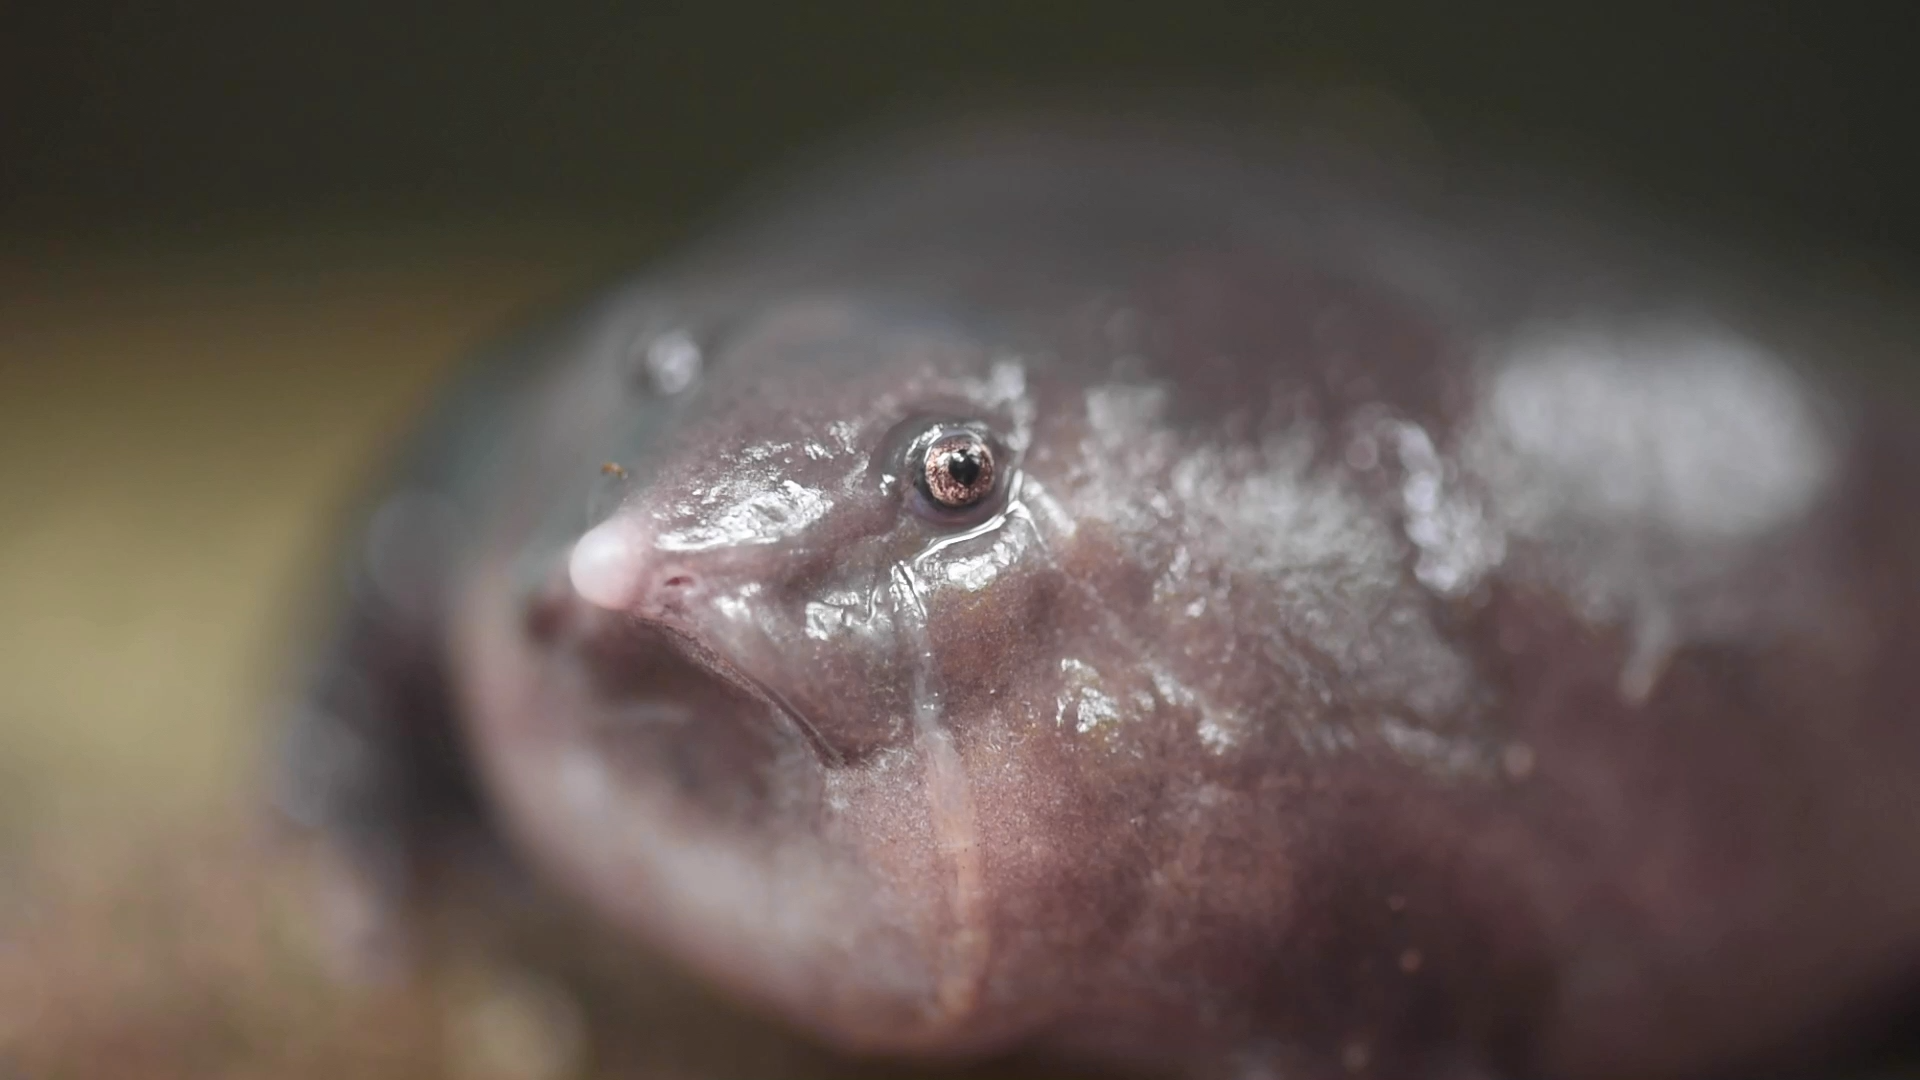 The Purple Frog up close